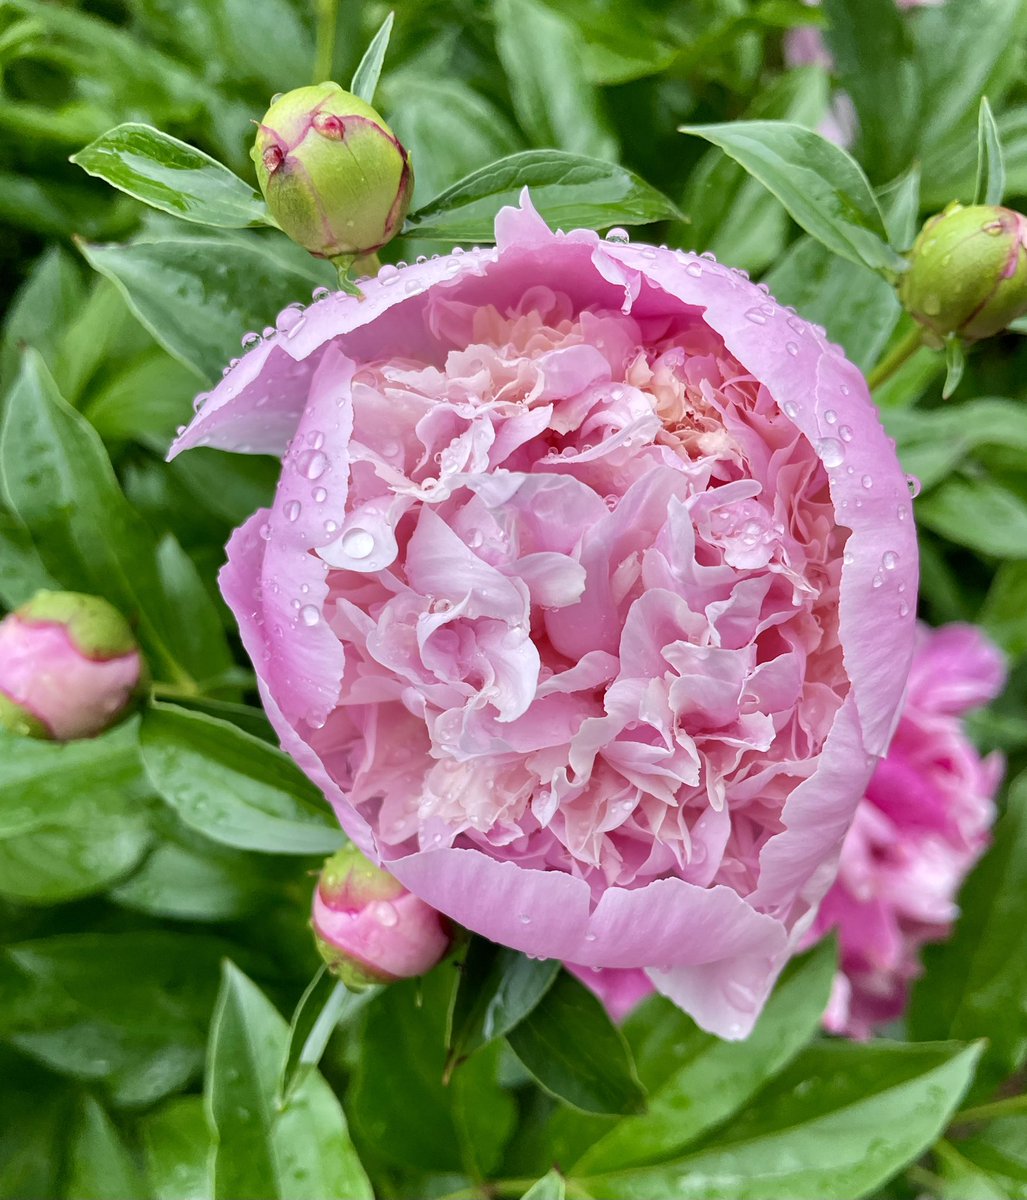 It’s been gloomy, non-stop rain all week in DC. But the fringe benefit is this: raindrops sparkling on a perfect peony, spotted on my morning walk today